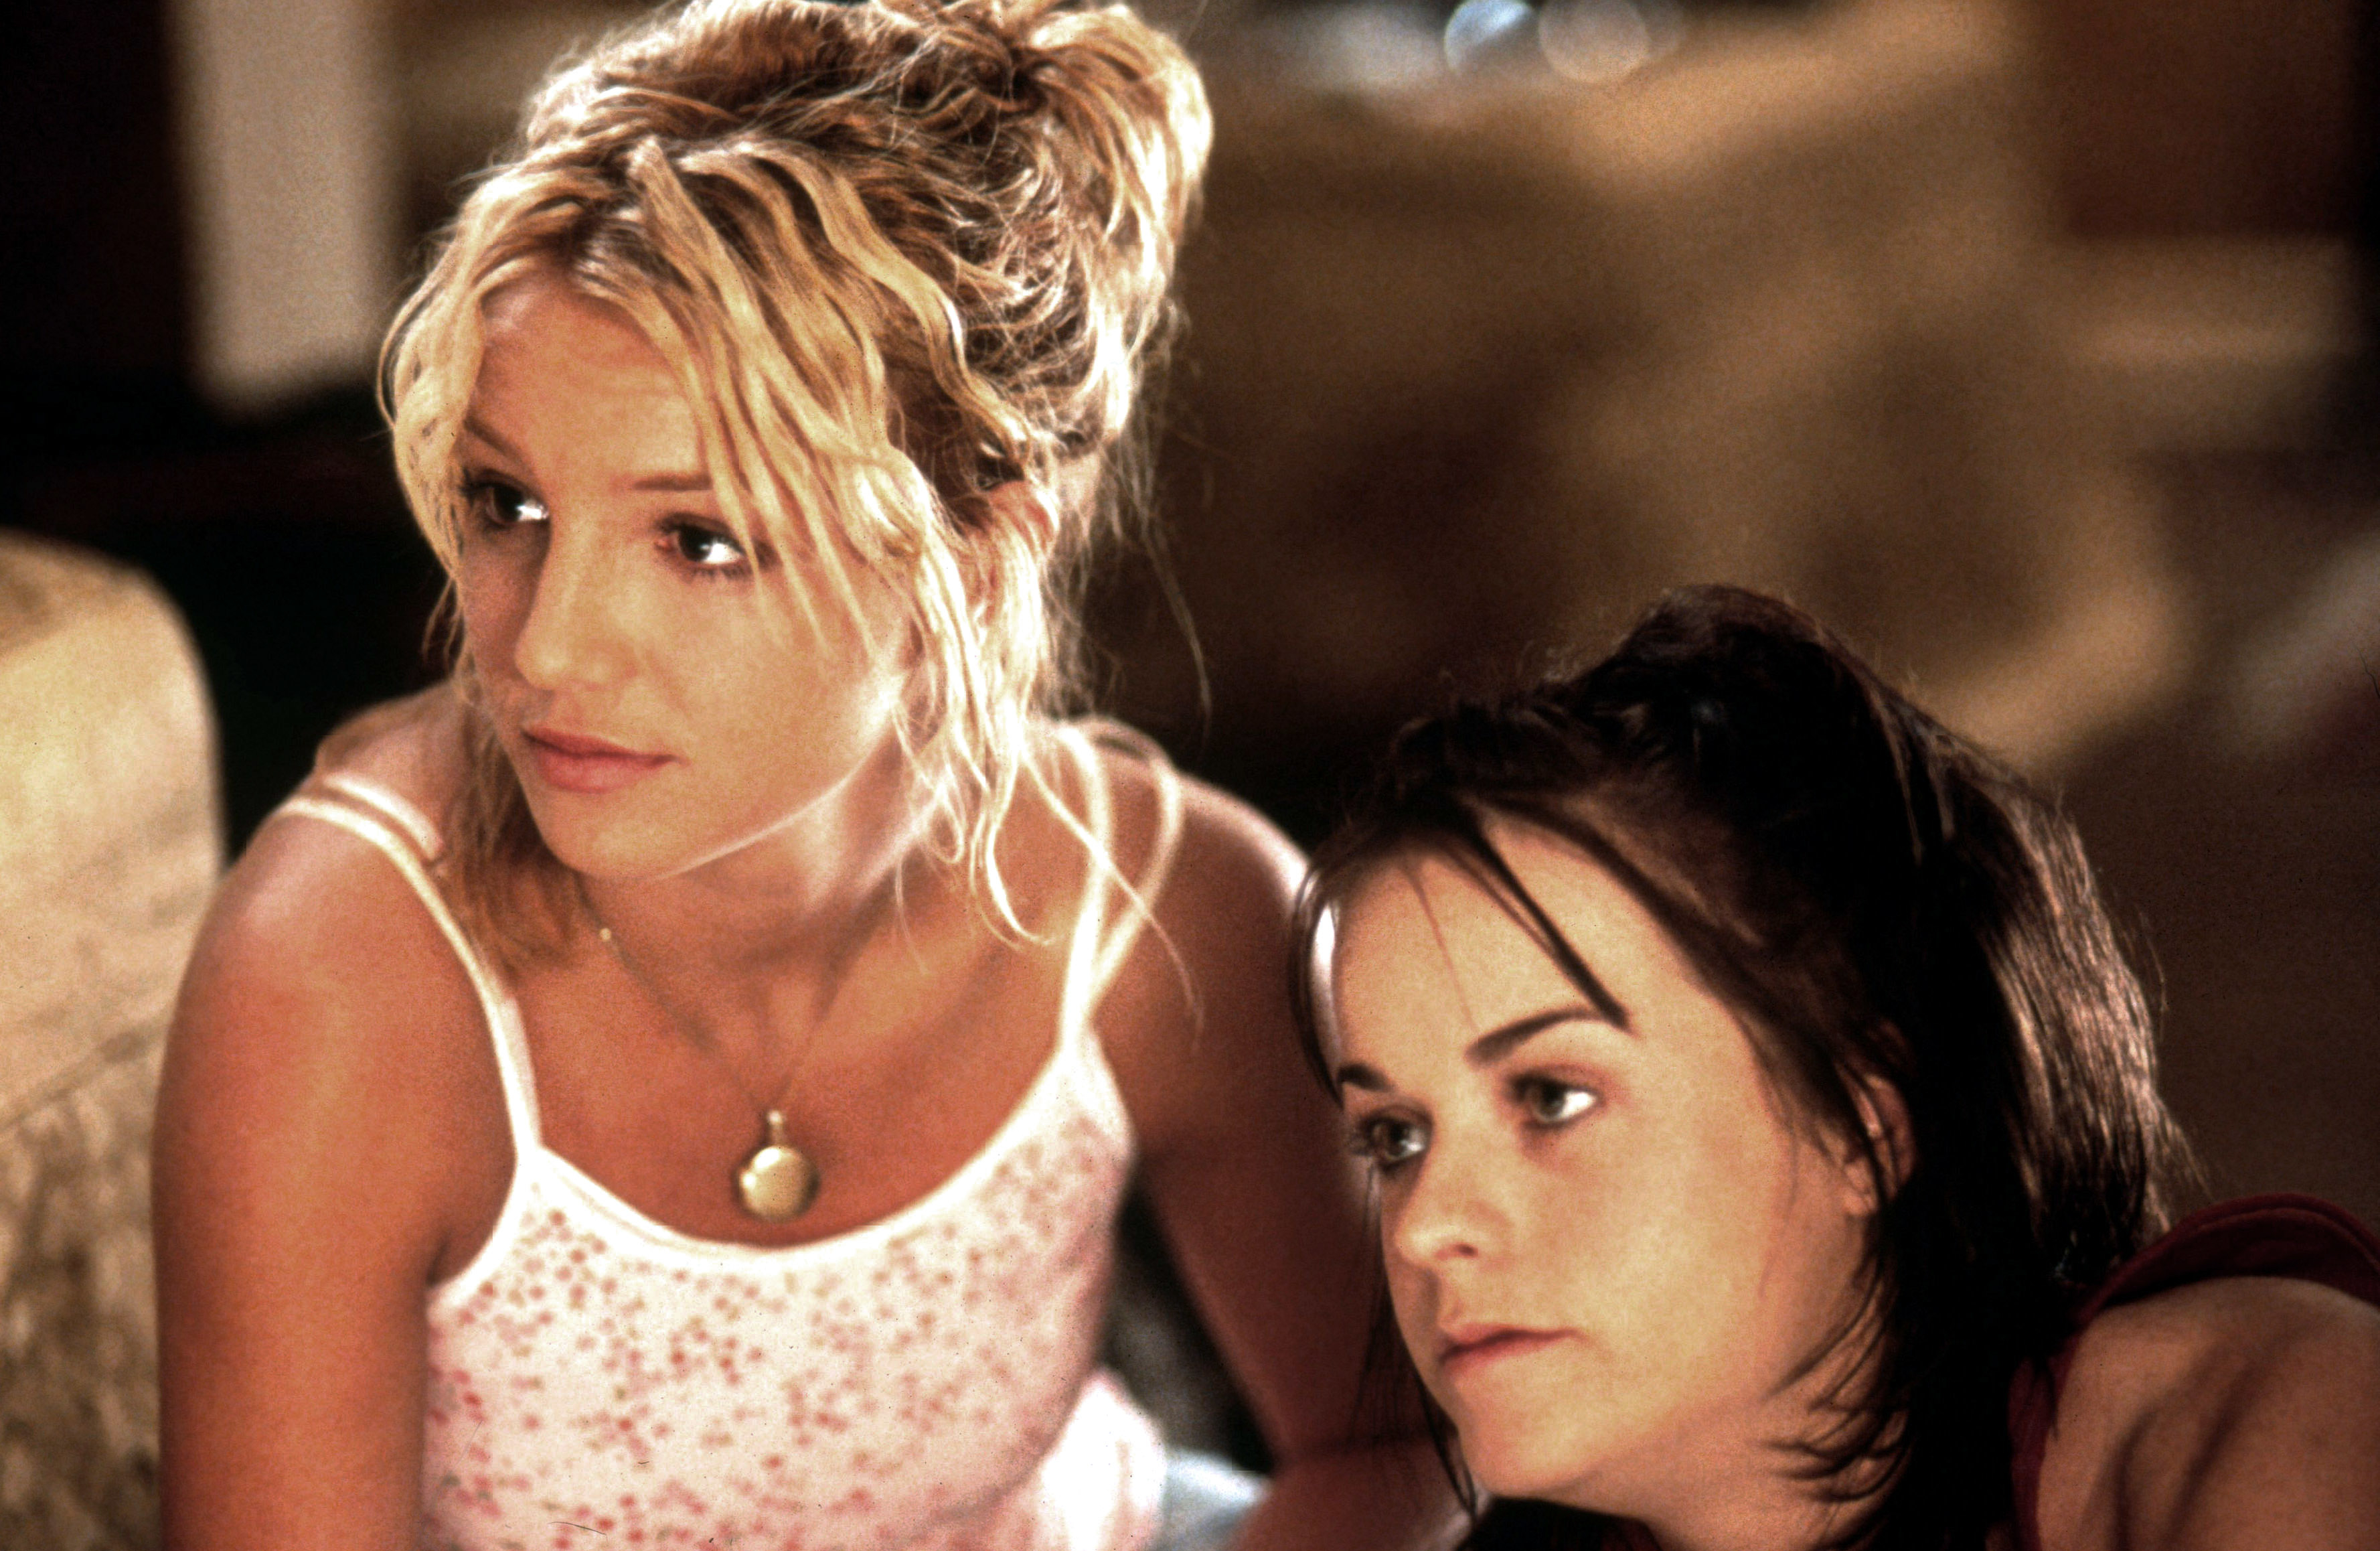 Britney Spears and Taryn Manning in a scene from the movie